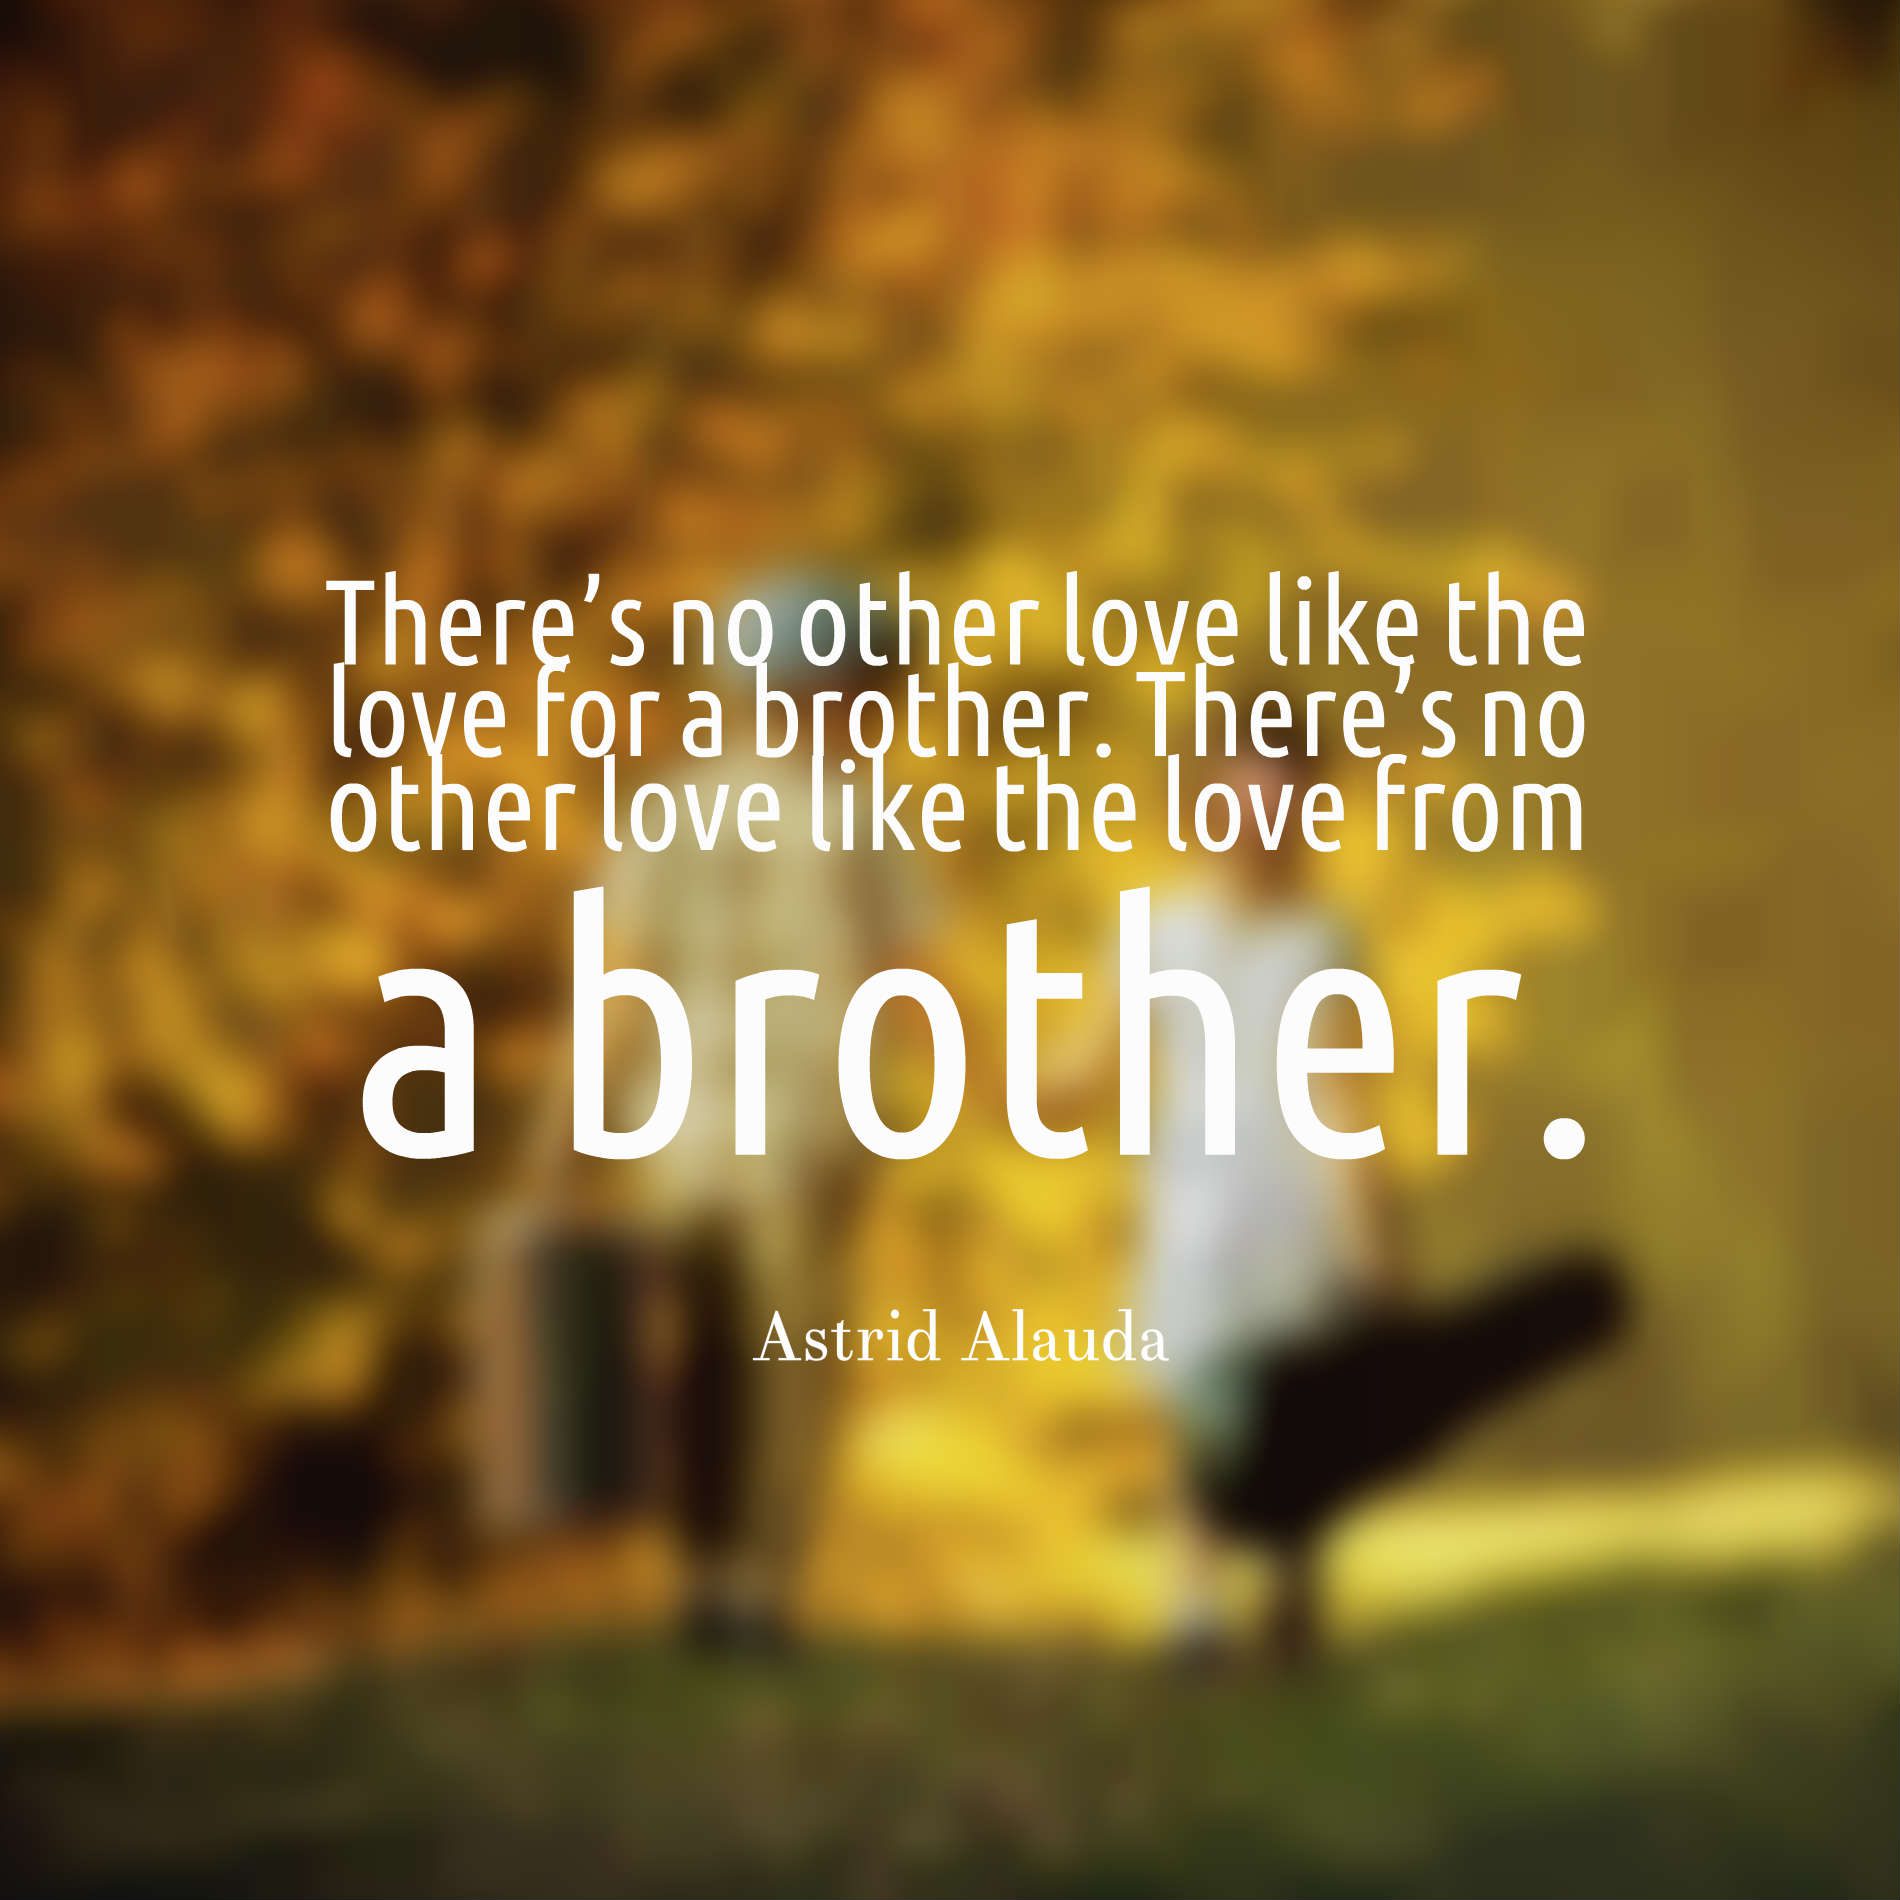 There’s no other love like the love for a brother. There’s no other love like the love from a brother.